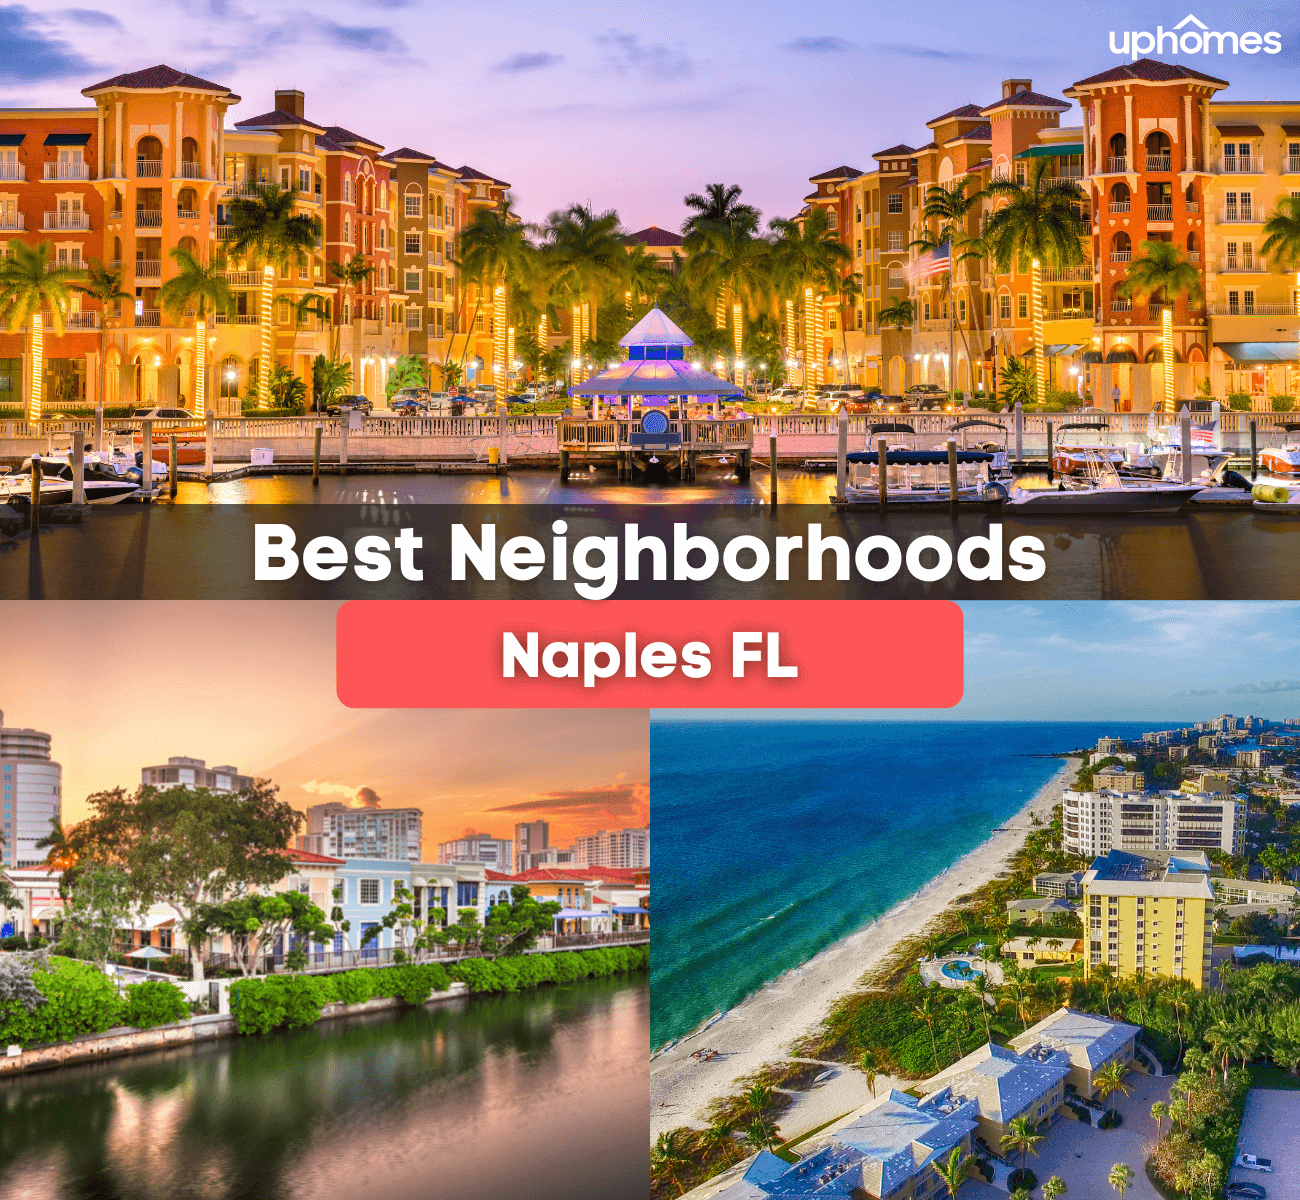 Best Neighborhoods in Naples, FL - What are the best places to live in Naples?